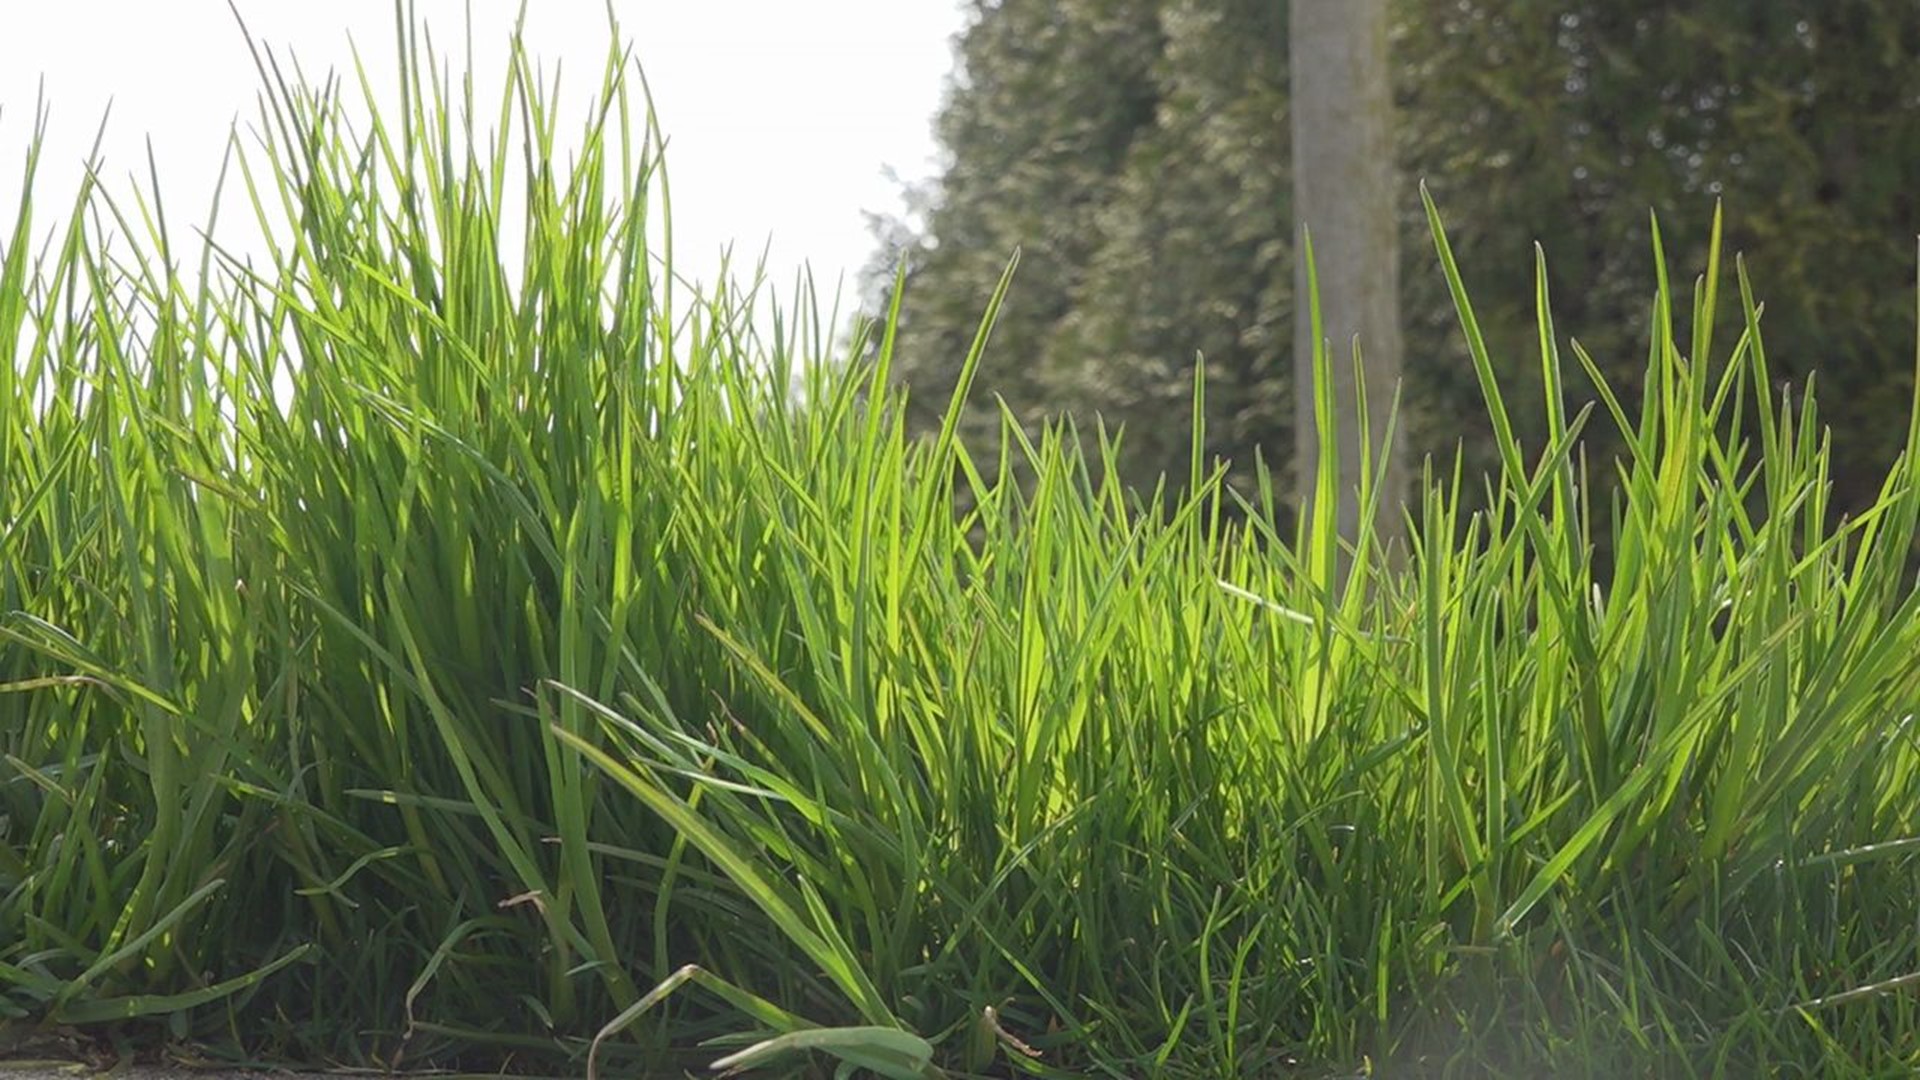 Experts say how you take care of your lawn in the spring will set you up for the rest of the year.